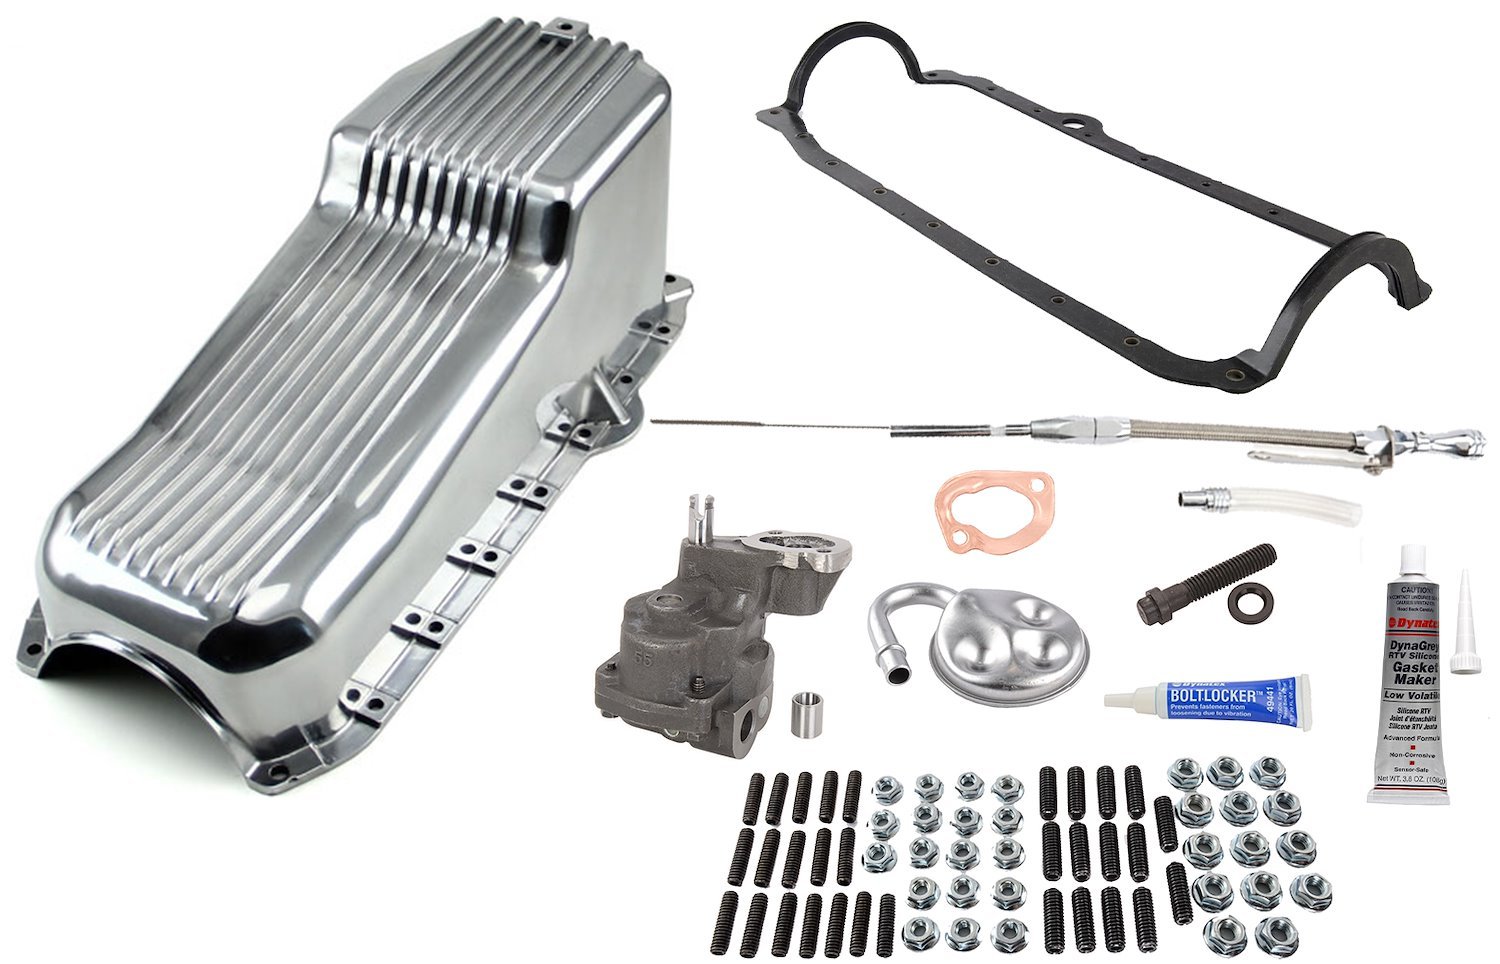 Aluminum Oil Pan/Pump Kit for Small Block Chevy (One-Piece Rear Main Seal)